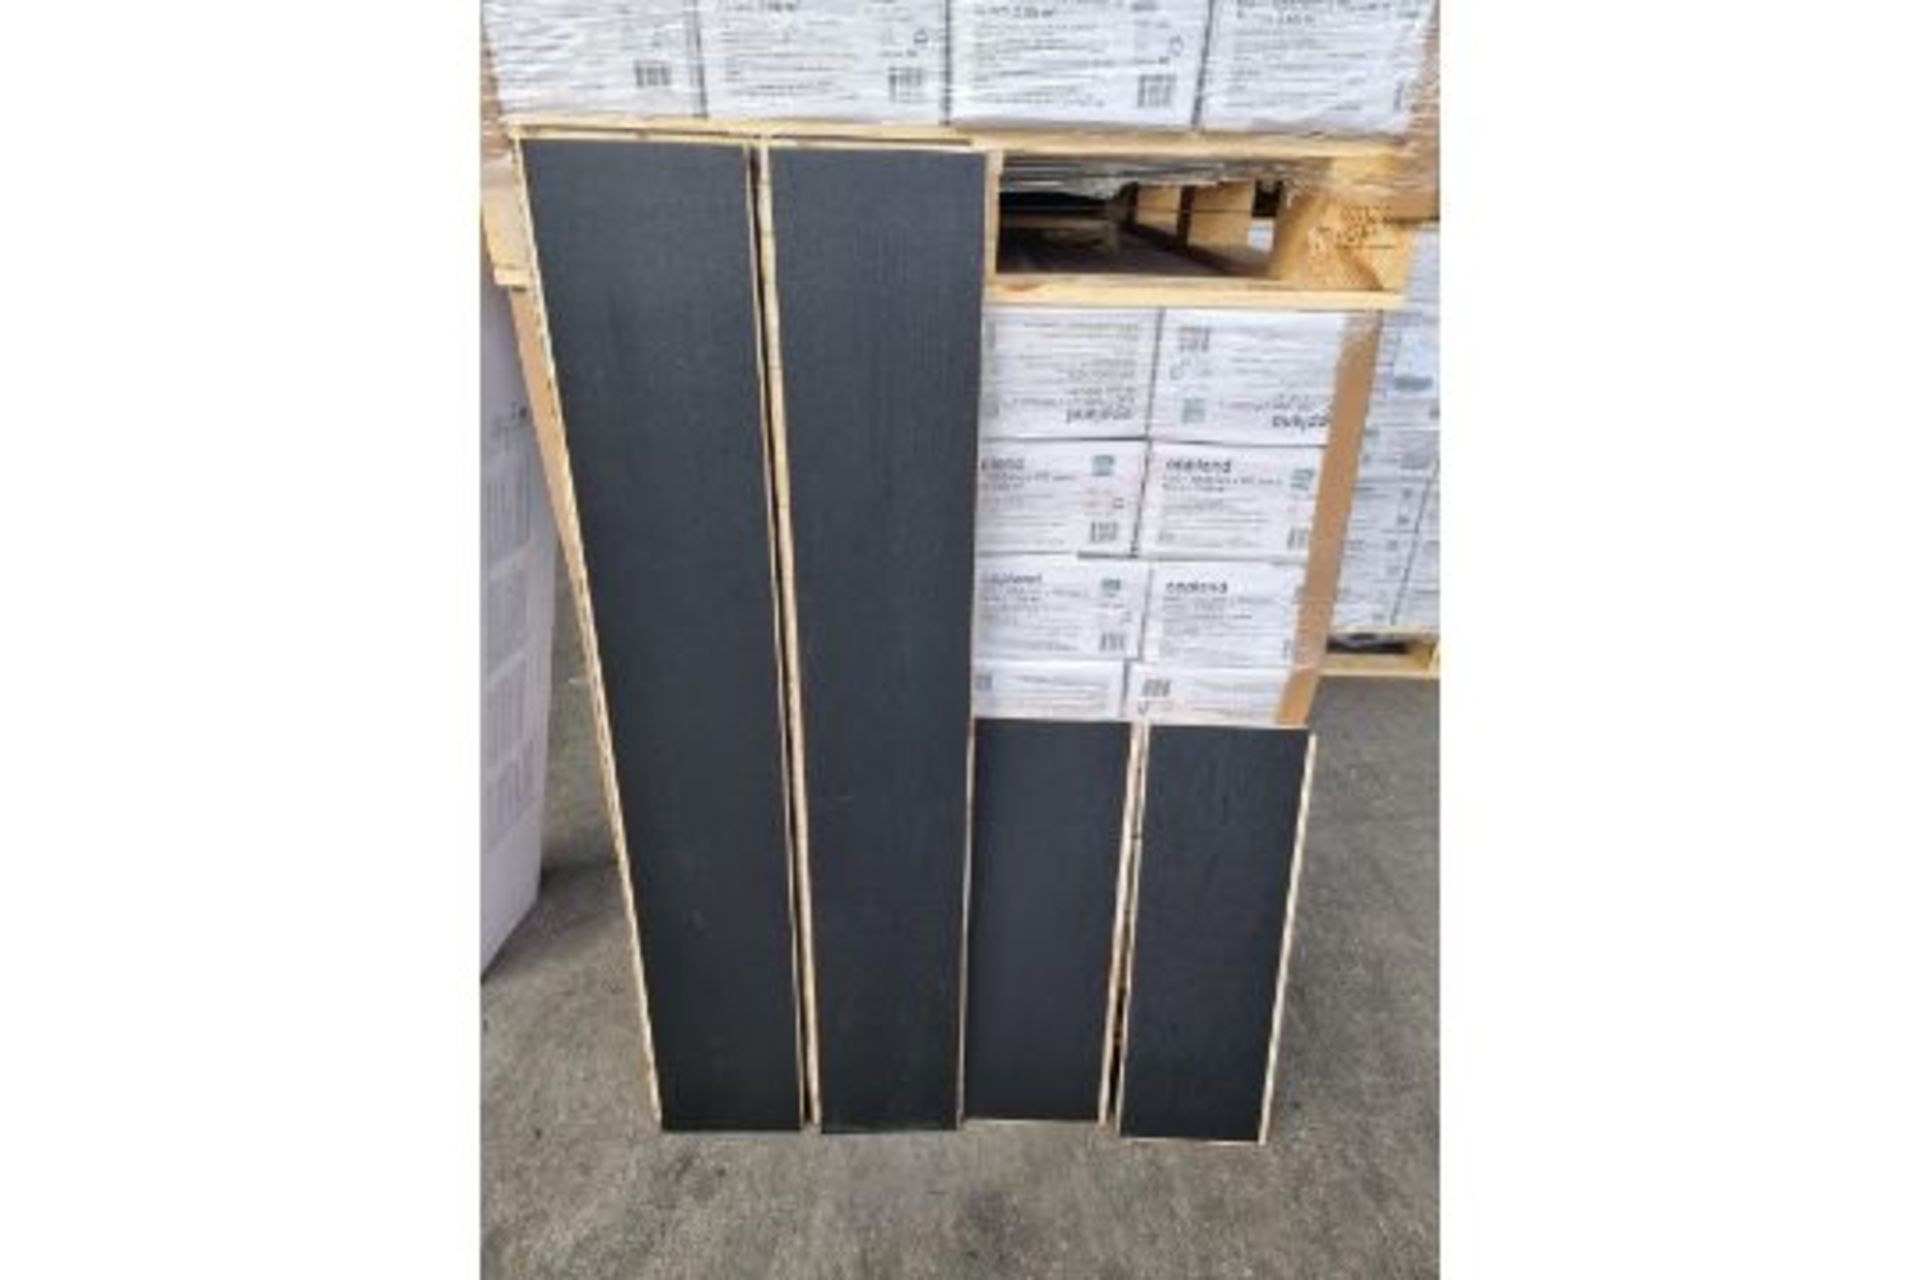 7 X NEW SEALED PACKS OF Opplend Black Oak Real Wood Top layer Flooring. Each pack contains 2.05m2,